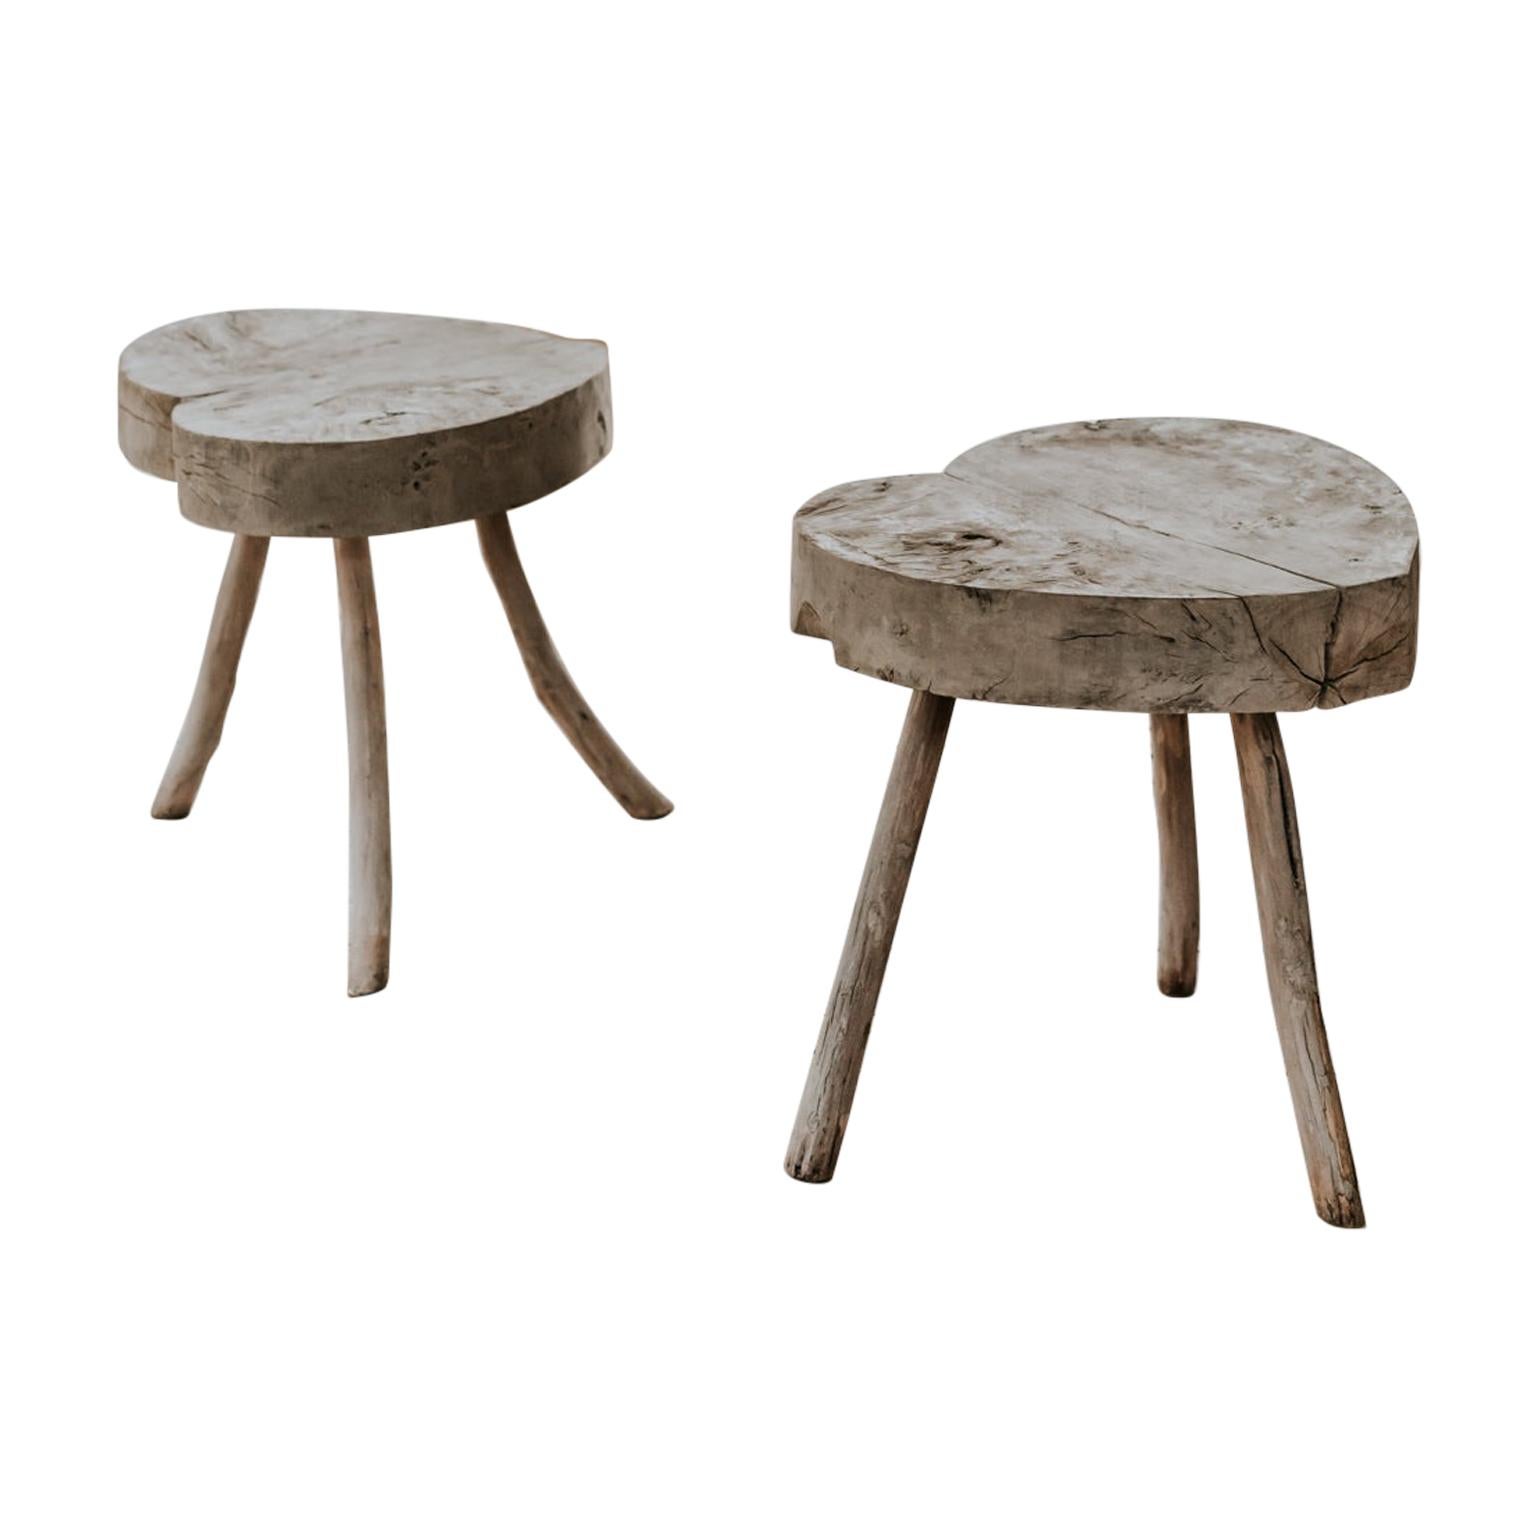 Pair of Quirky Heartshaped Tables